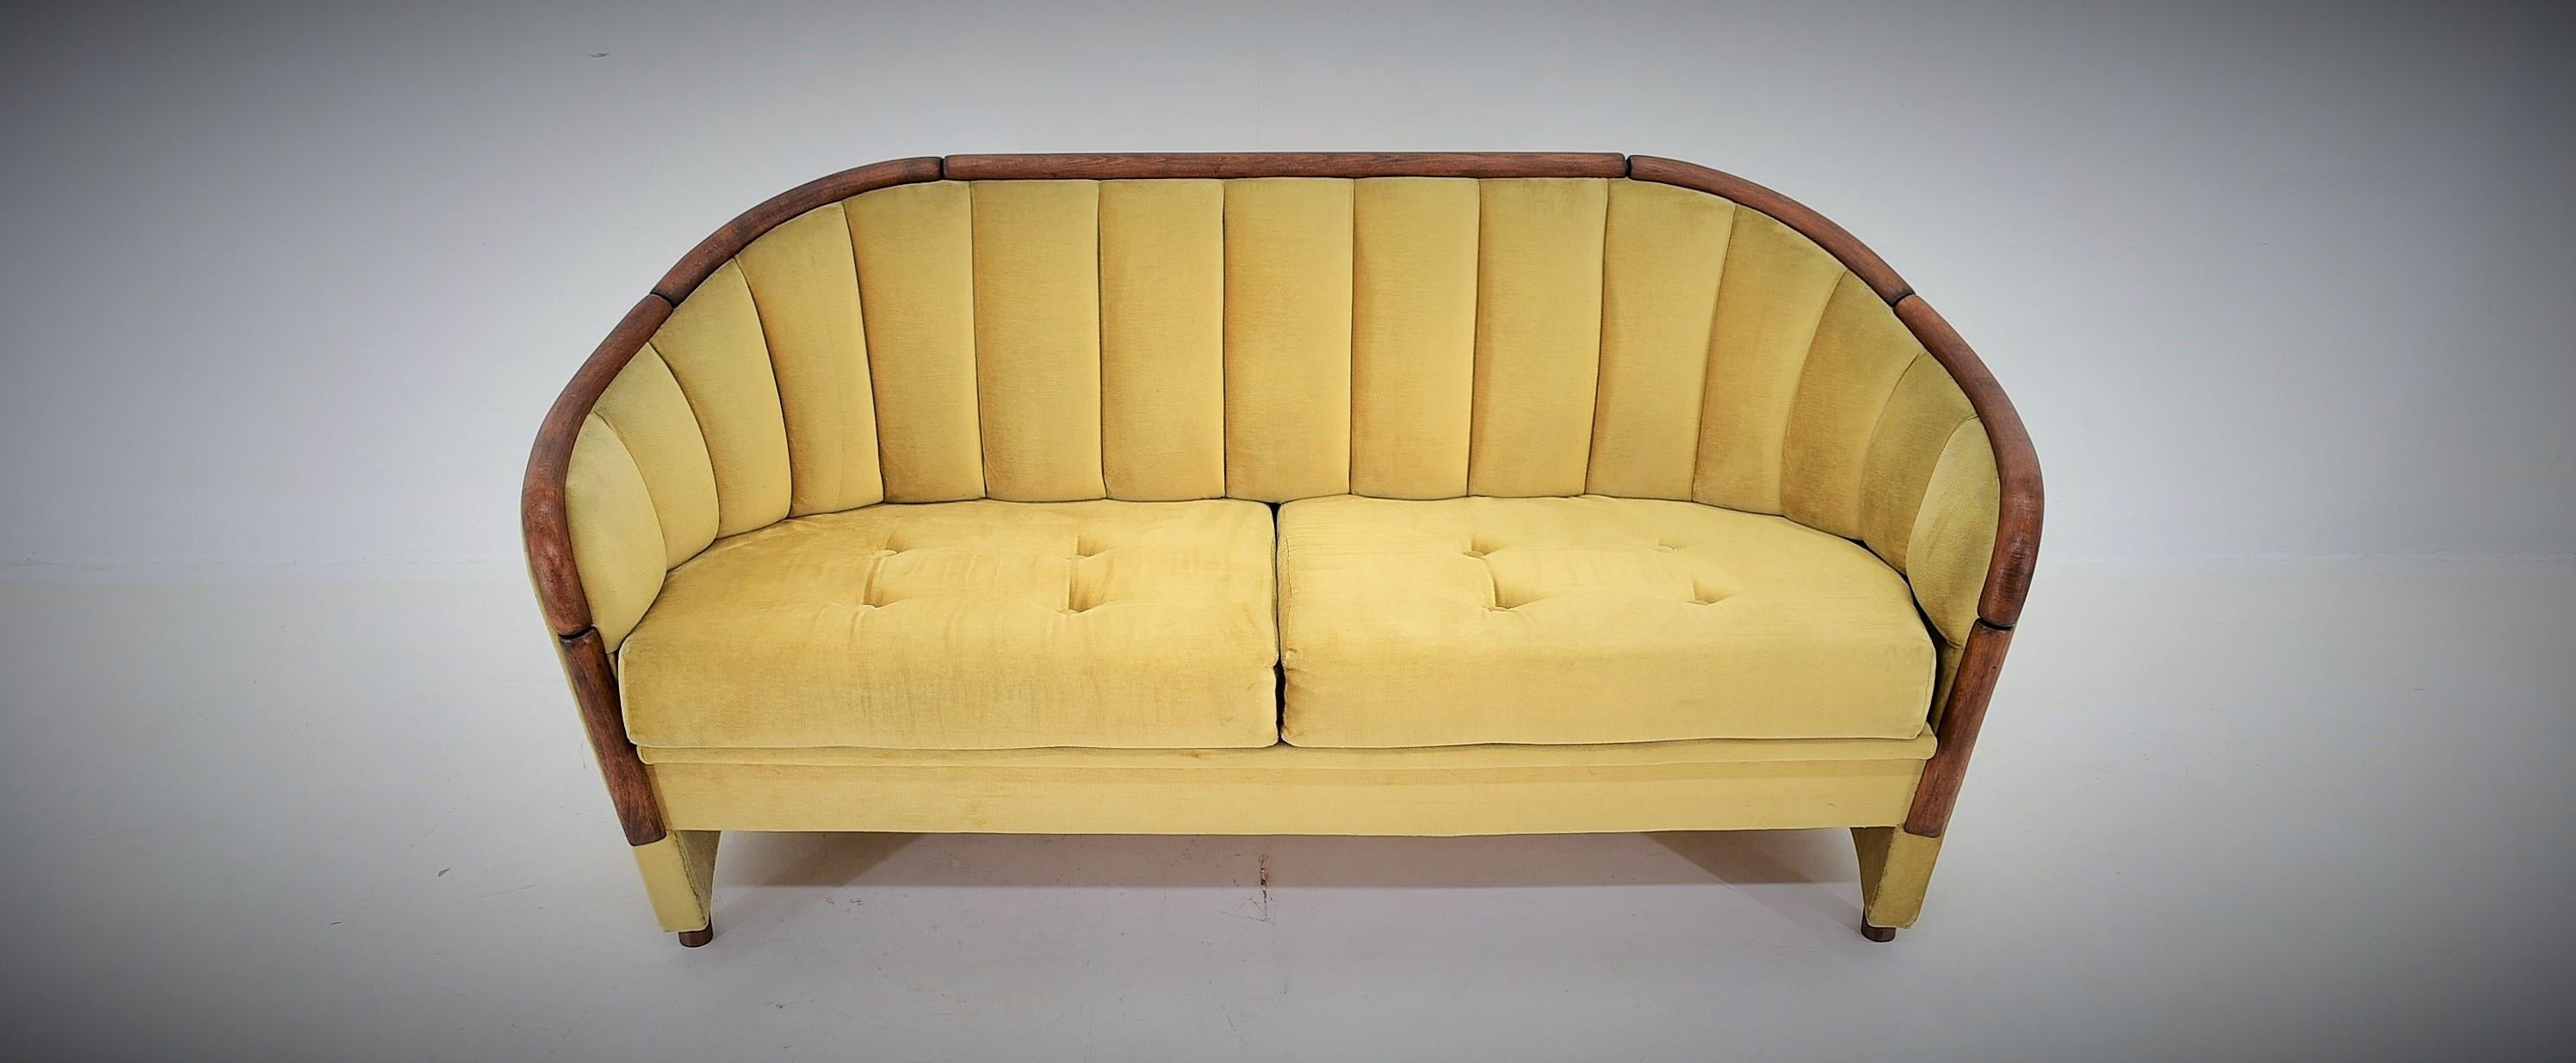 Mid-Century Modern Italian 2-Seat Sofa in the Style of Gio Ponti, 1950s For Sale